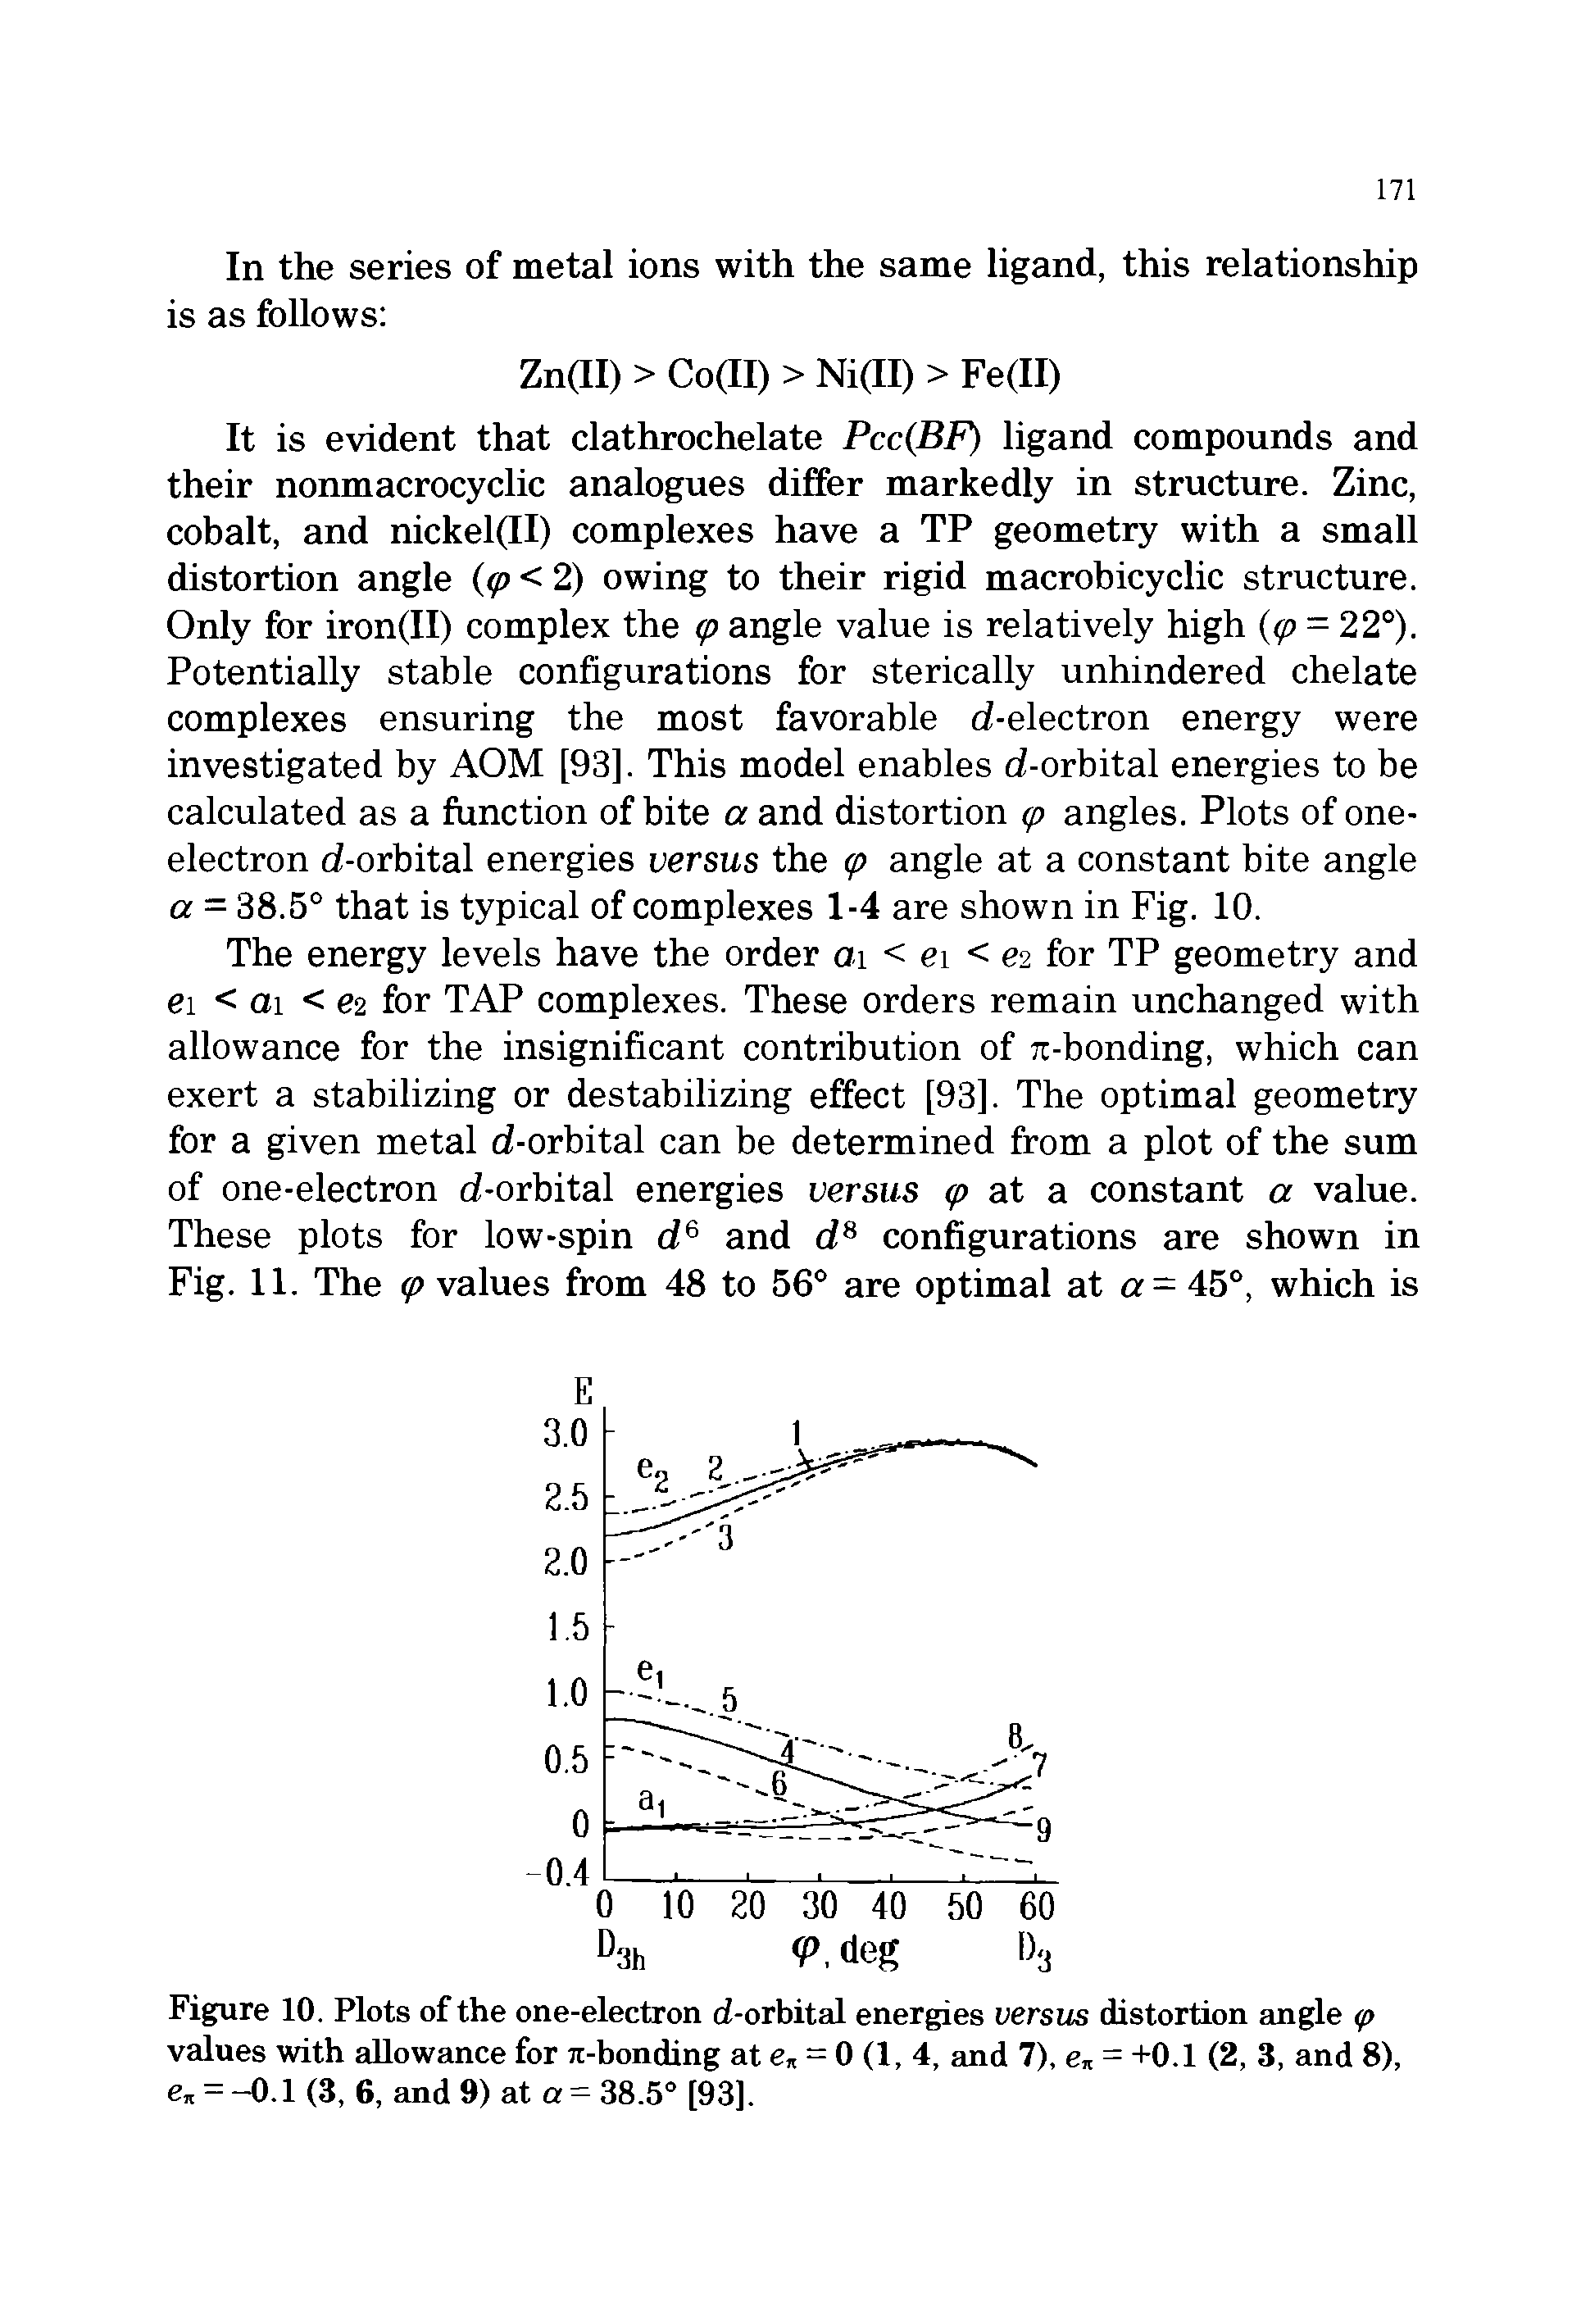 Figure 10. Plots of the one-electron d-orbital energies versus distortion angle values with allowance for 7t-bonding at = 0 (1, 4, and 7), = +0.1 (2, 3, and 8),...